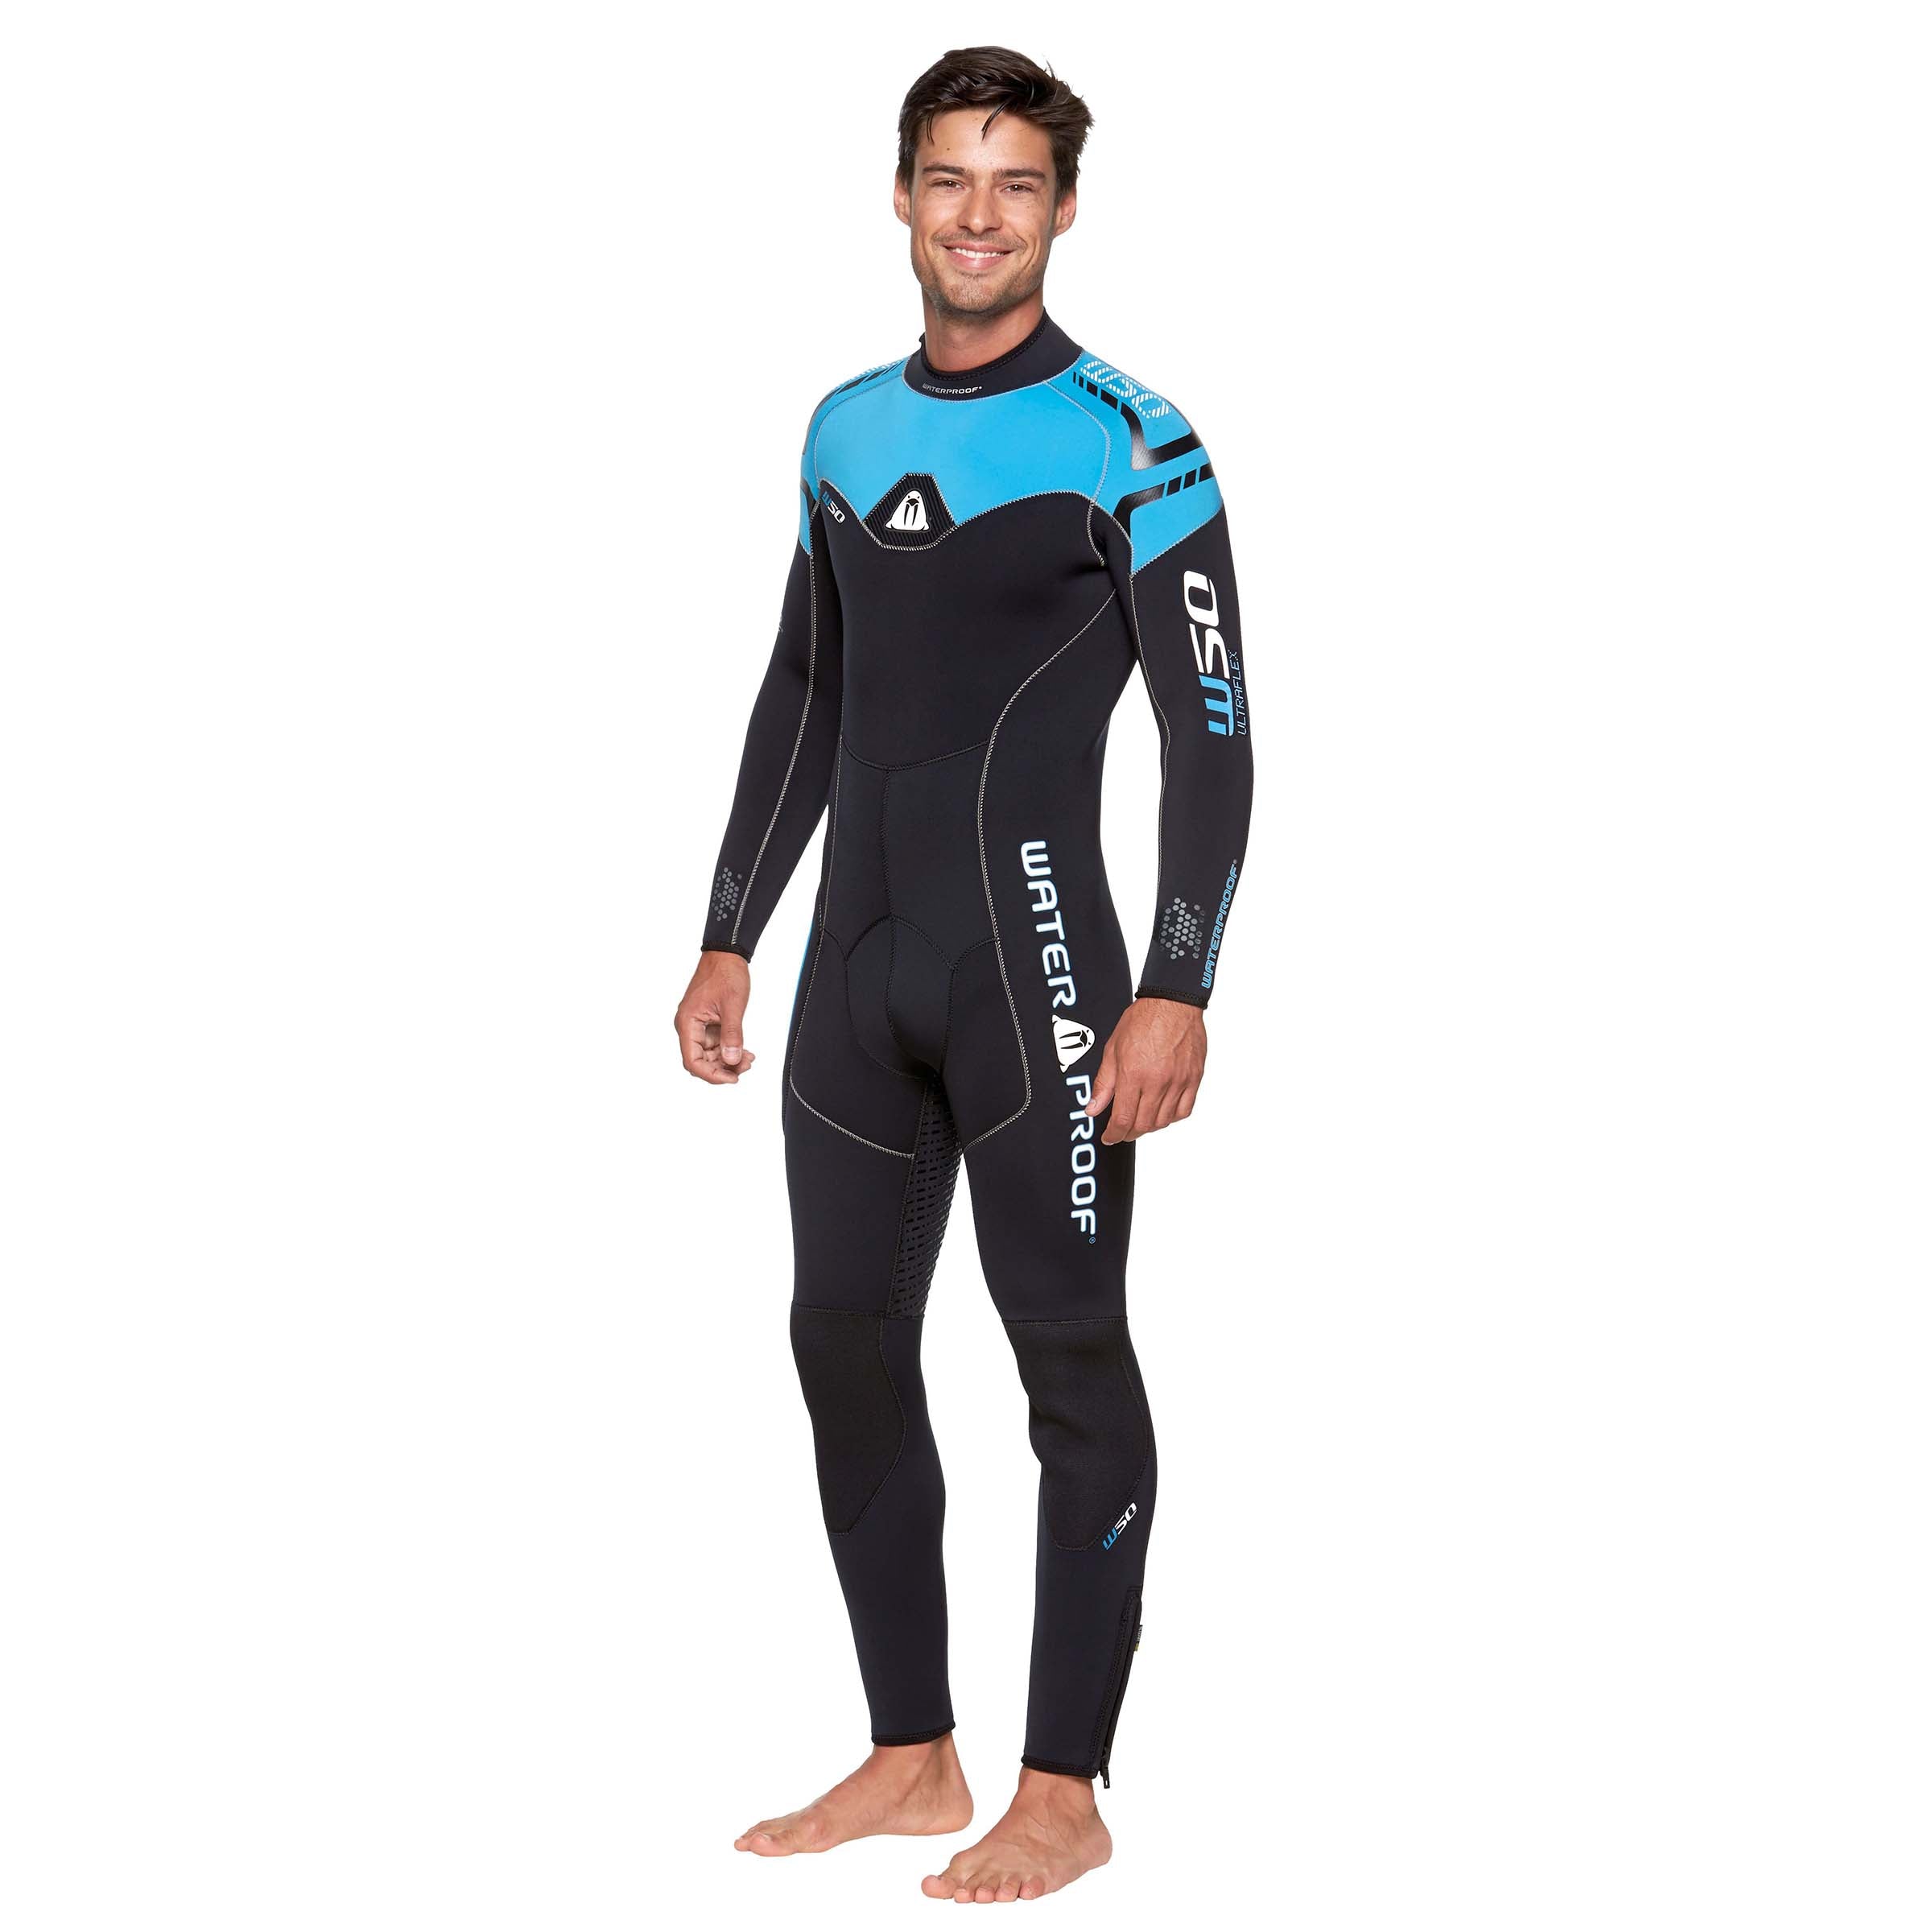 W50 Mens Small 5mm Wetsuit -Shop Display